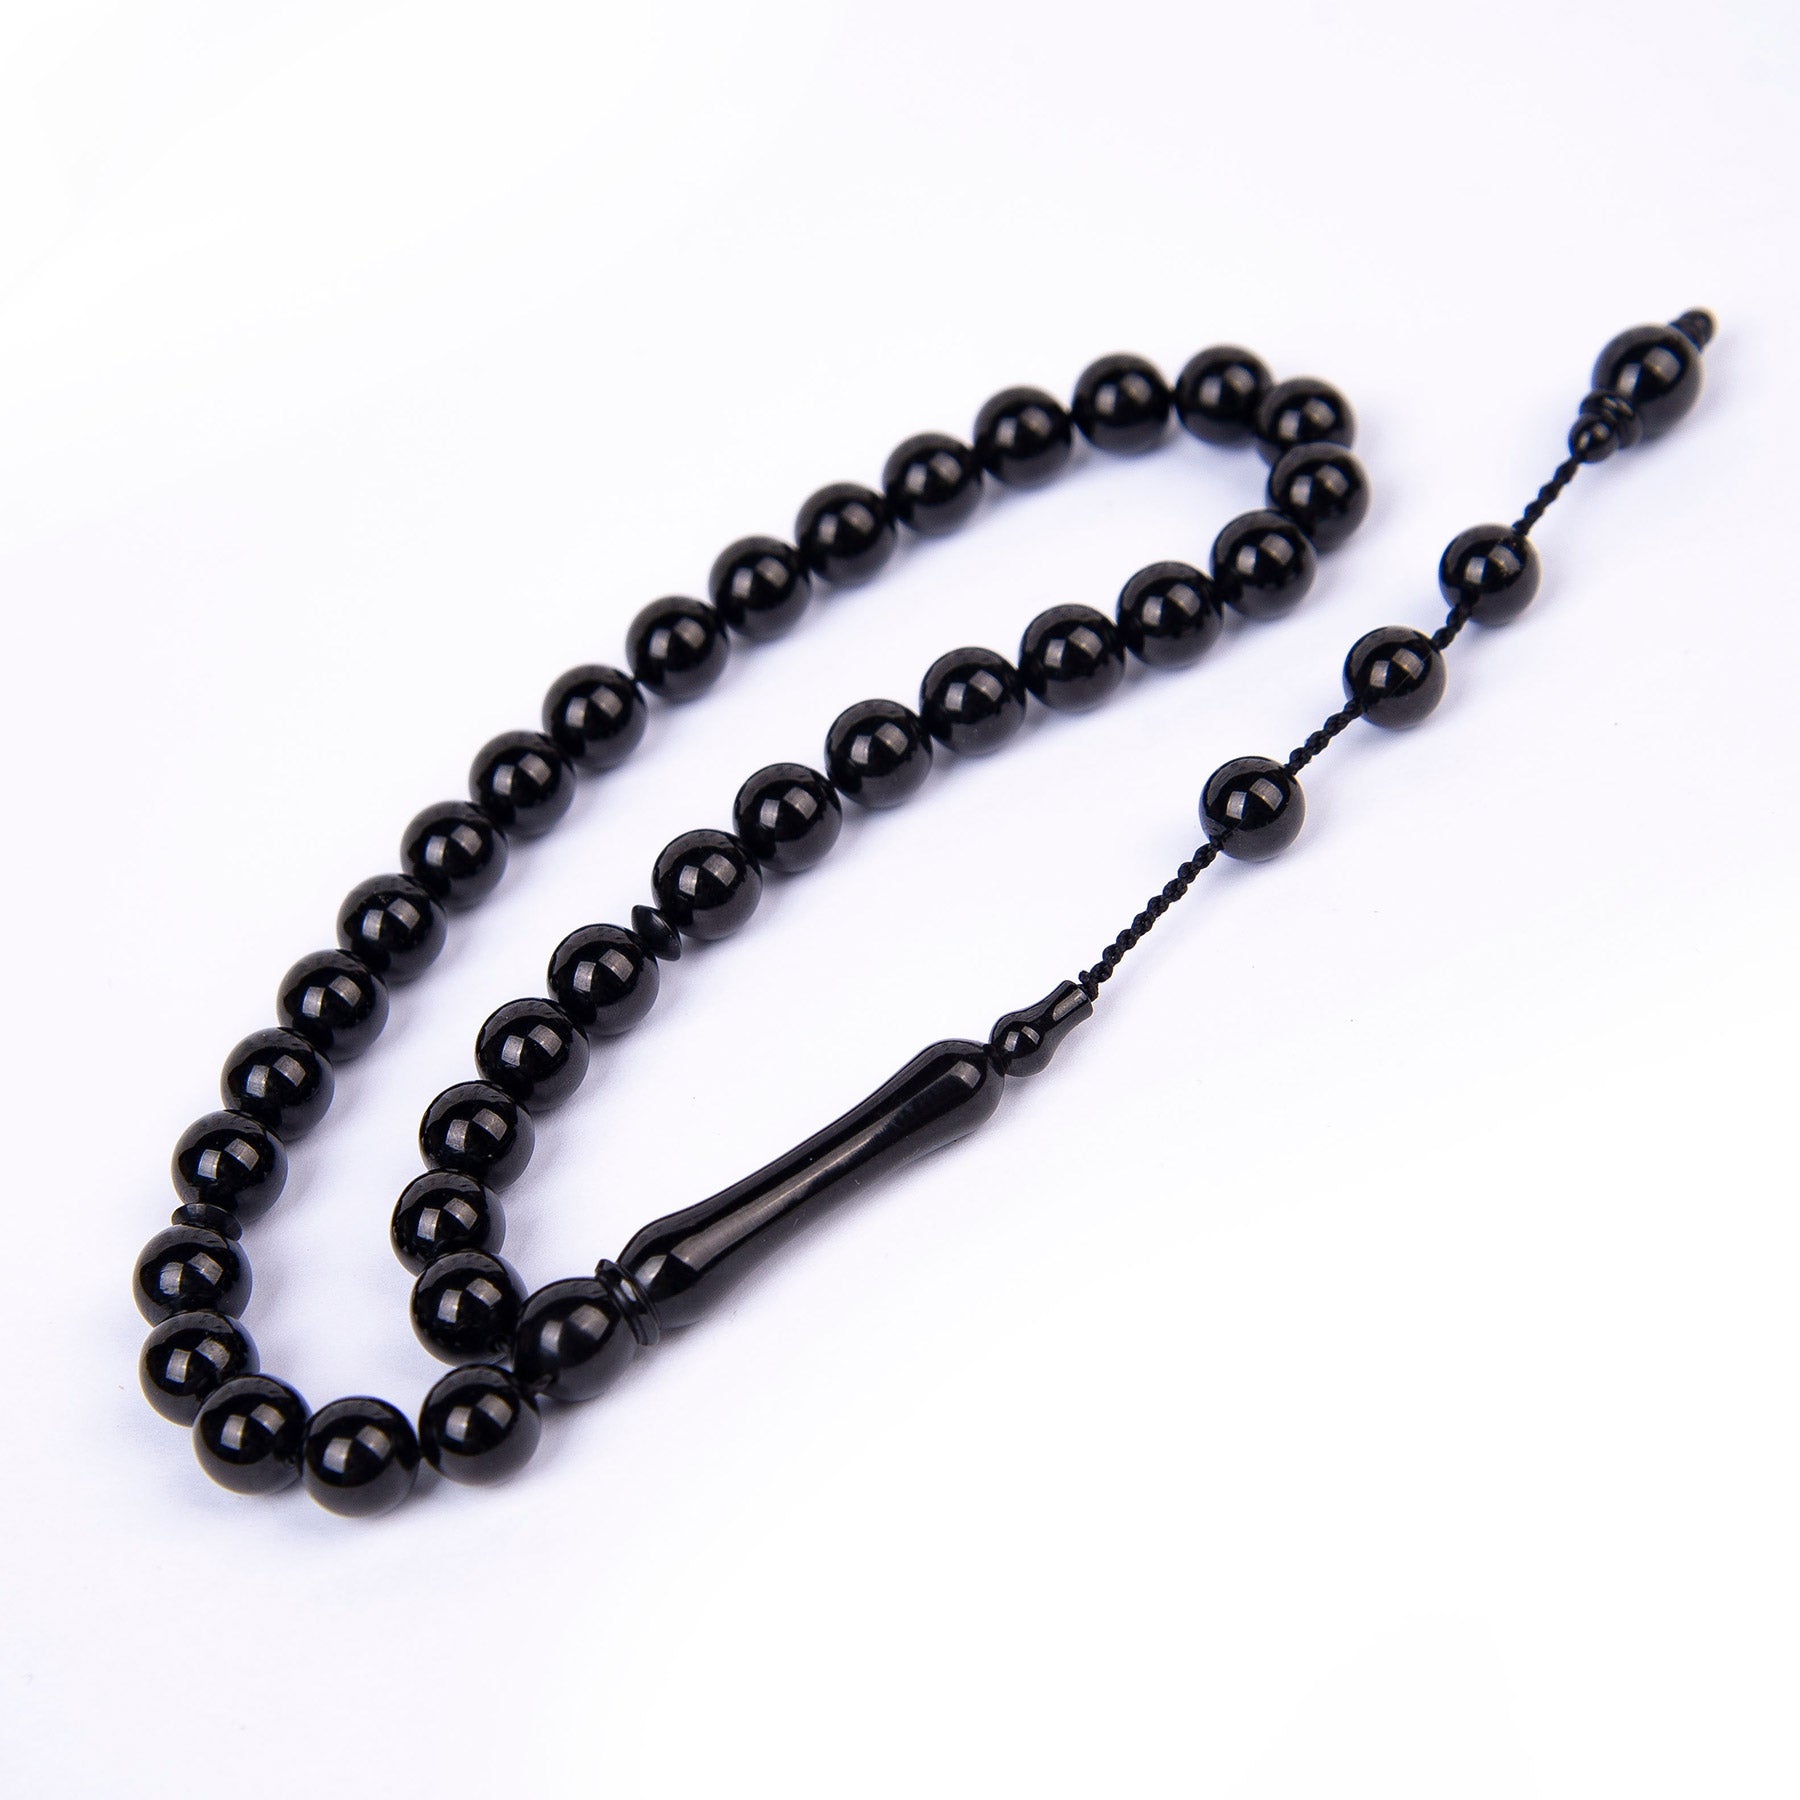 Oltu Stone Prayer Beads with Sphere Cutting System 3